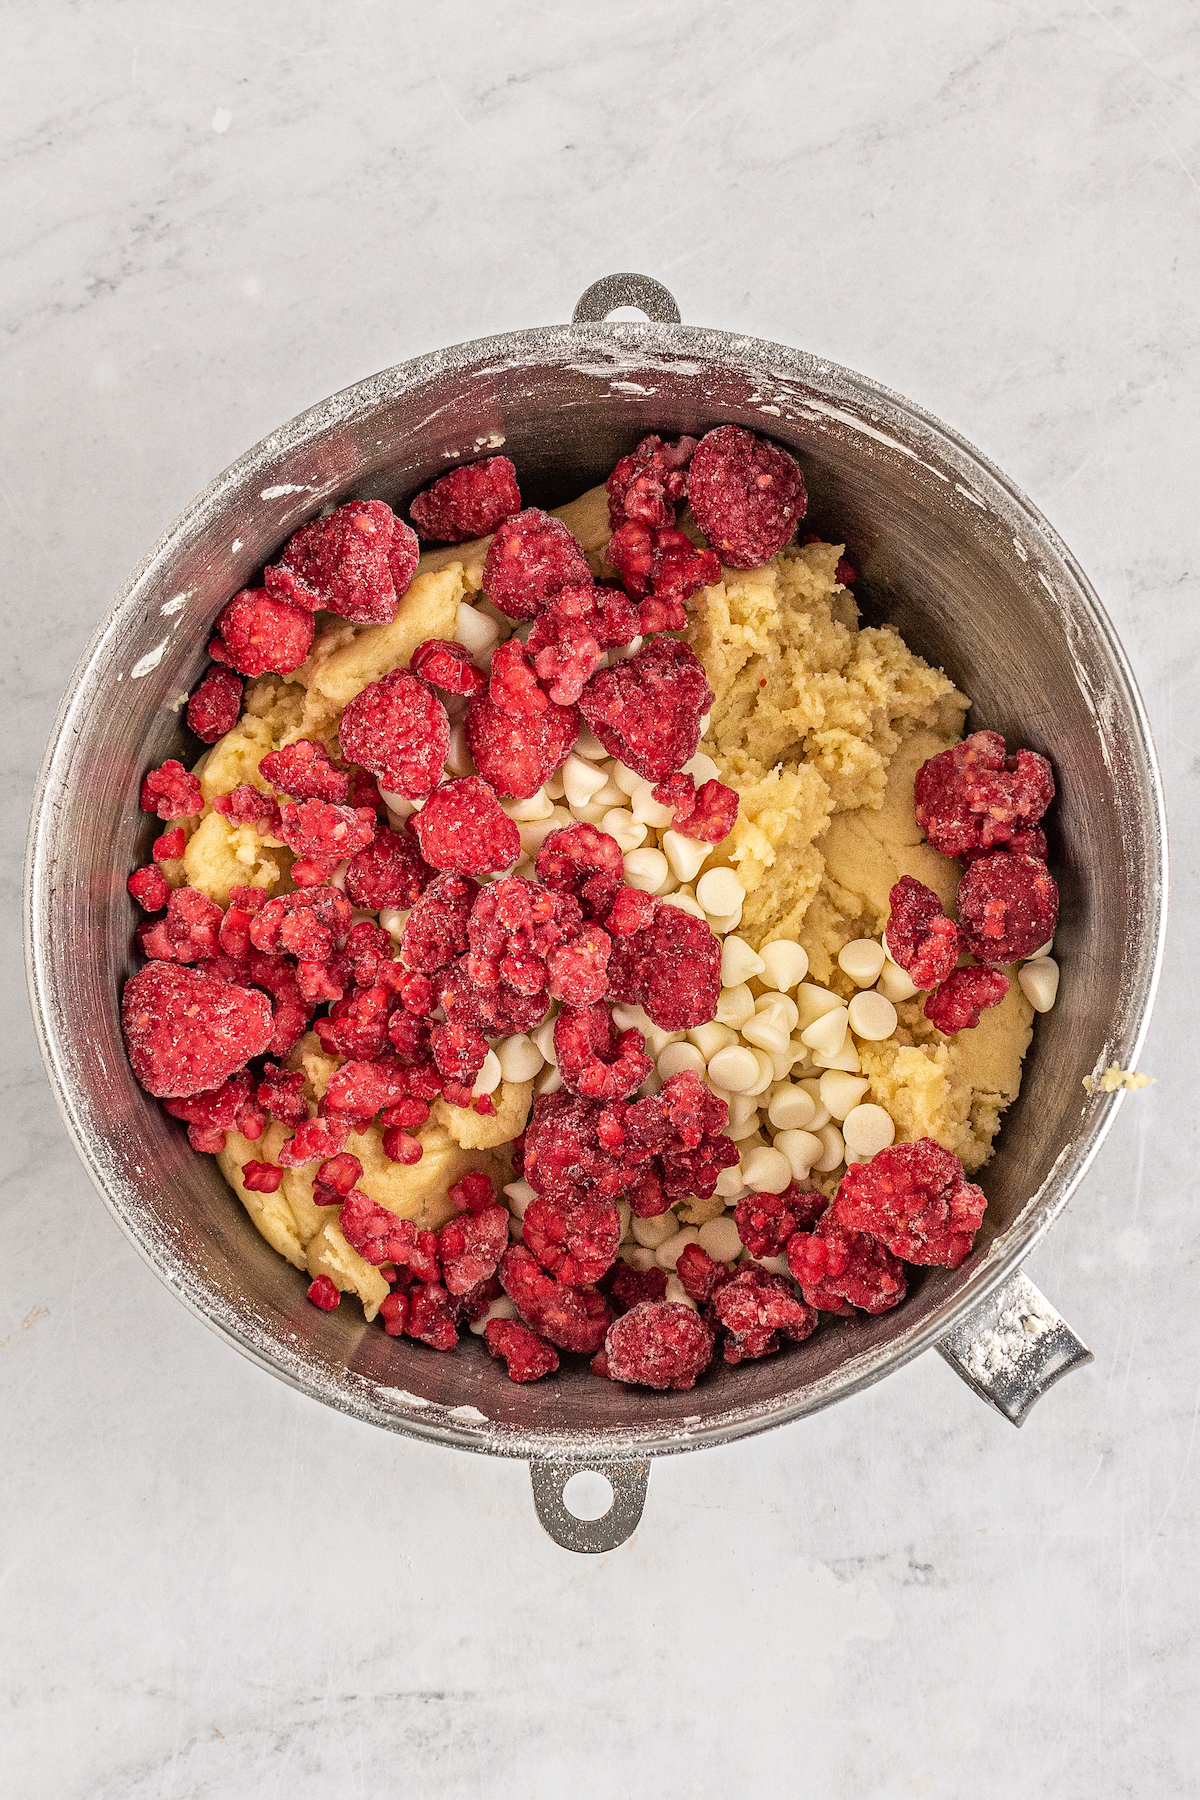 Cookie dough in a mixing bowl. Frozen raspberries and white chocolate chips have been dumped on top, but are not yet mixed in.